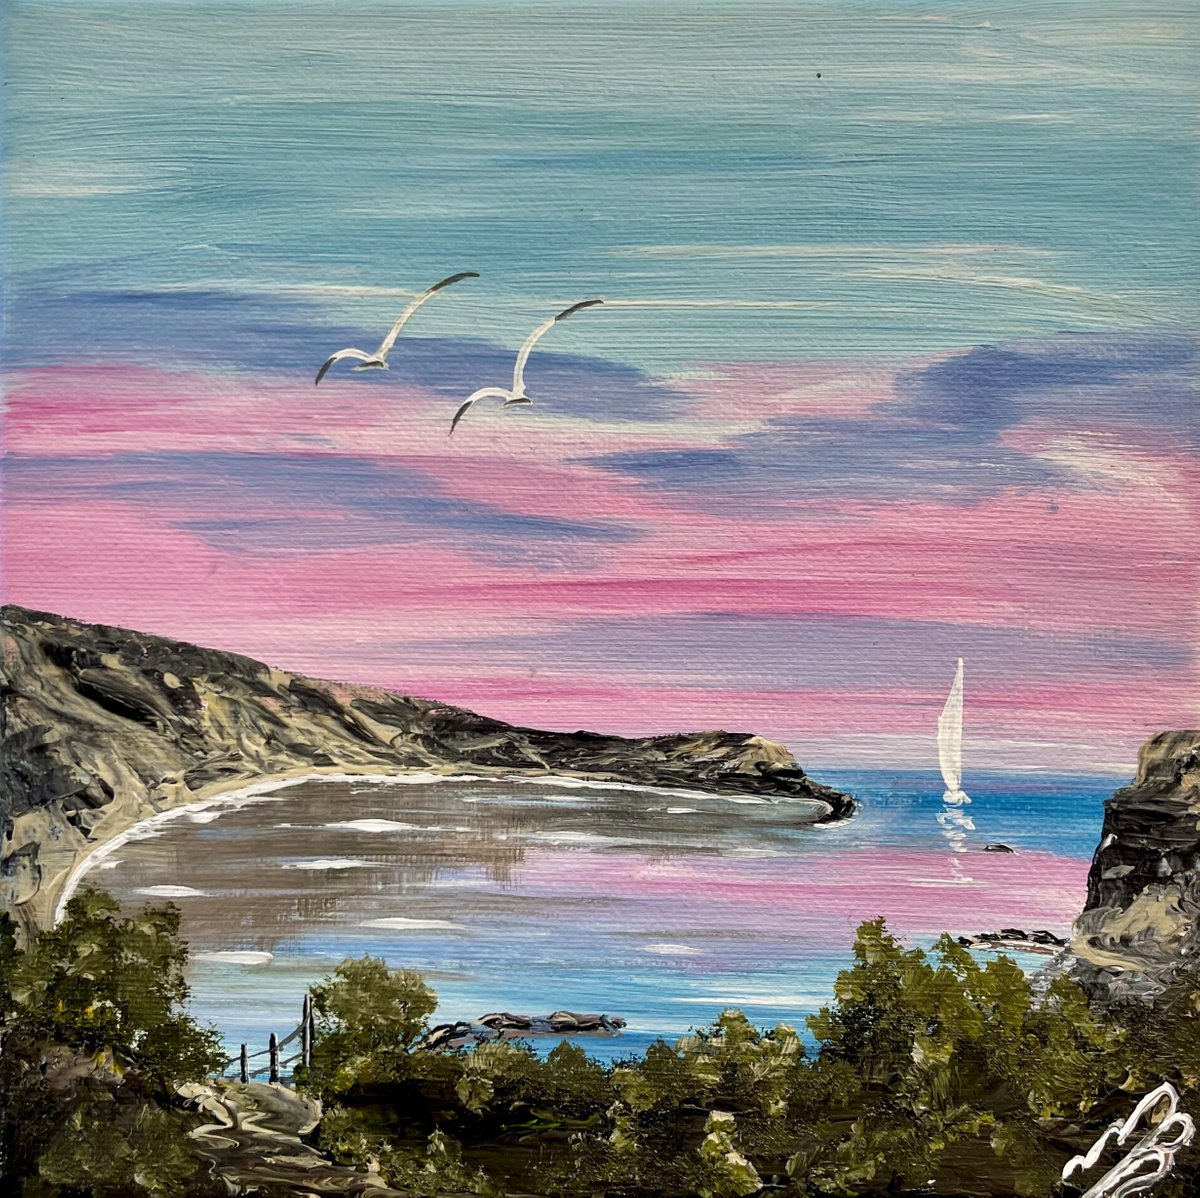 Lulworth Cove Under a Pink Sky by Marja Brown